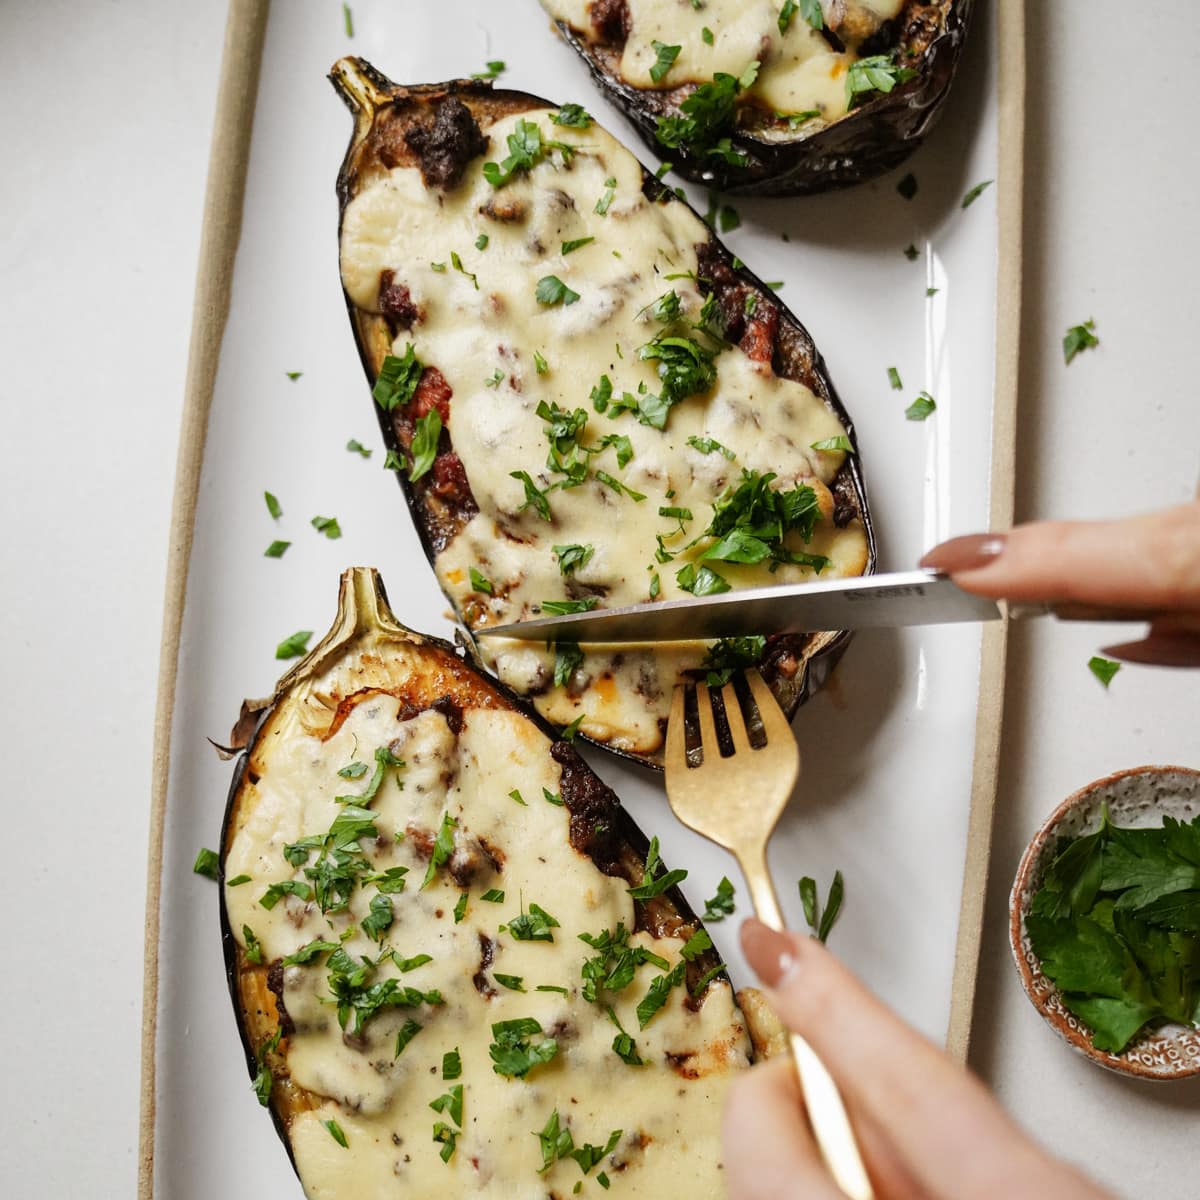 Knife and fork cutting into a stuffed eggplant